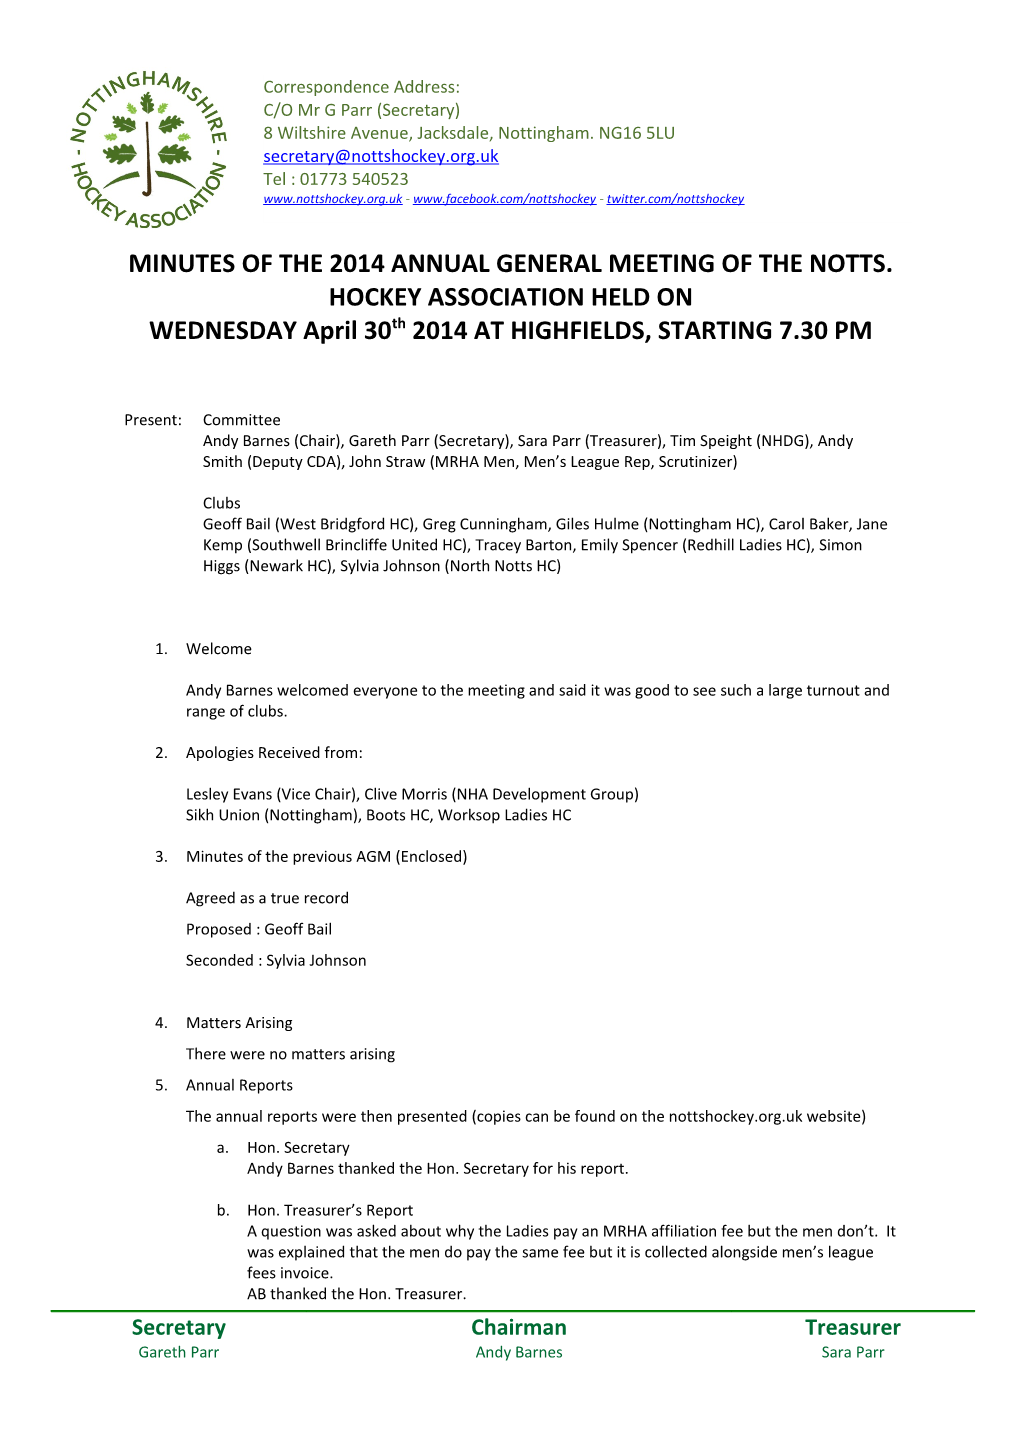 Minutes of the 2014Annual General Meeting of the Notts. Hockey Association Held on Wednesday